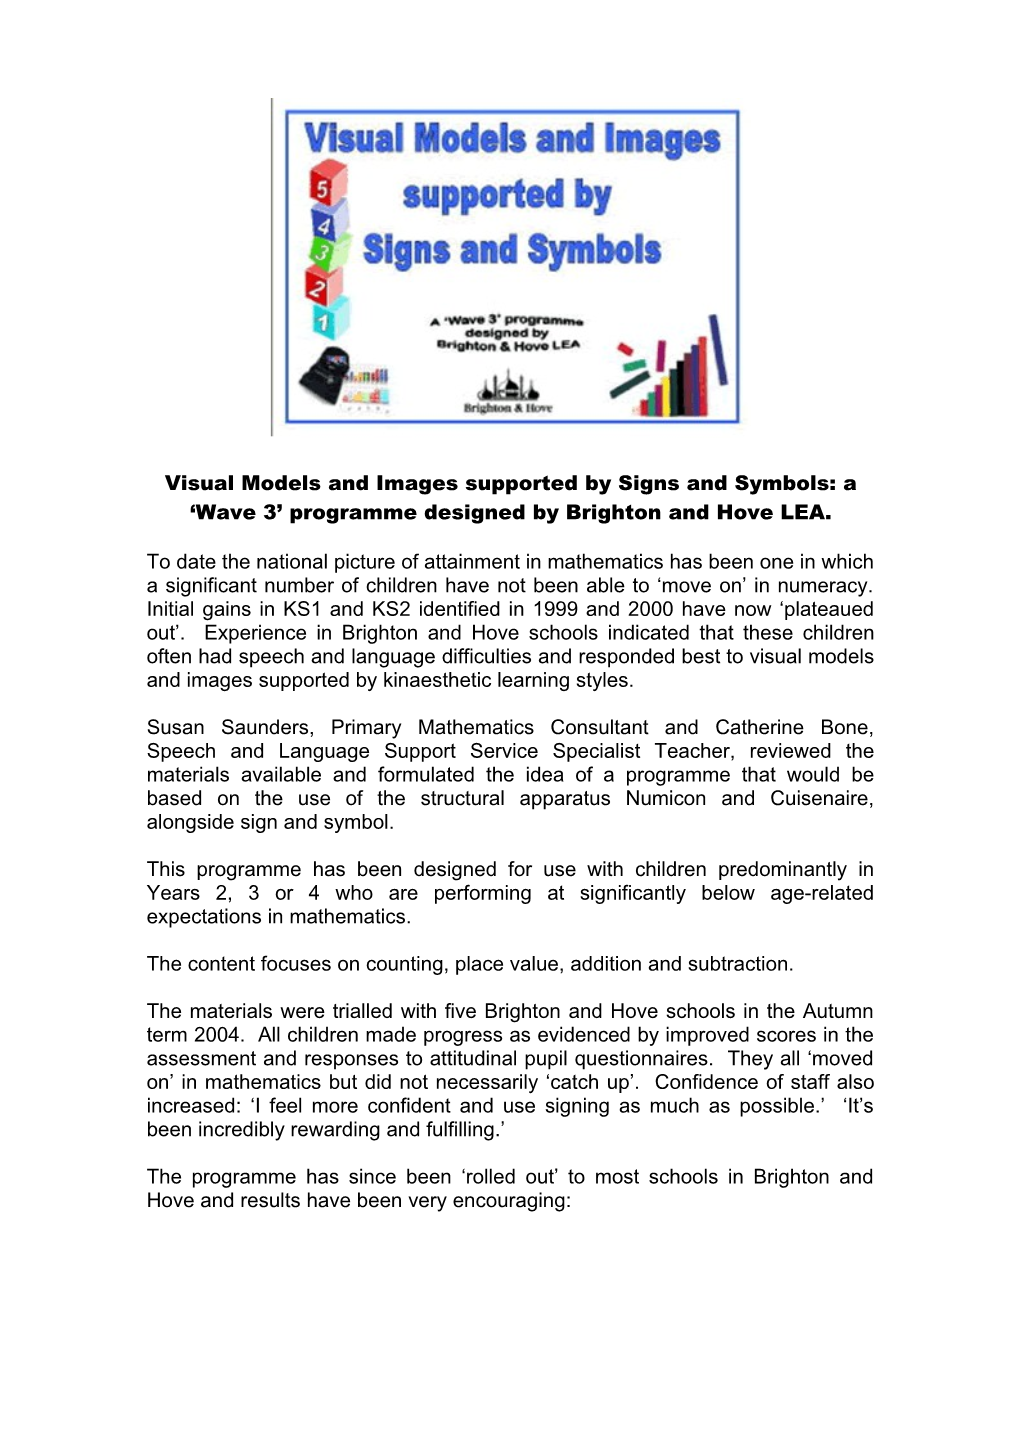 Visual Models and Images Supported by Signs and Symbols: a Wave 3 Programme Designed By